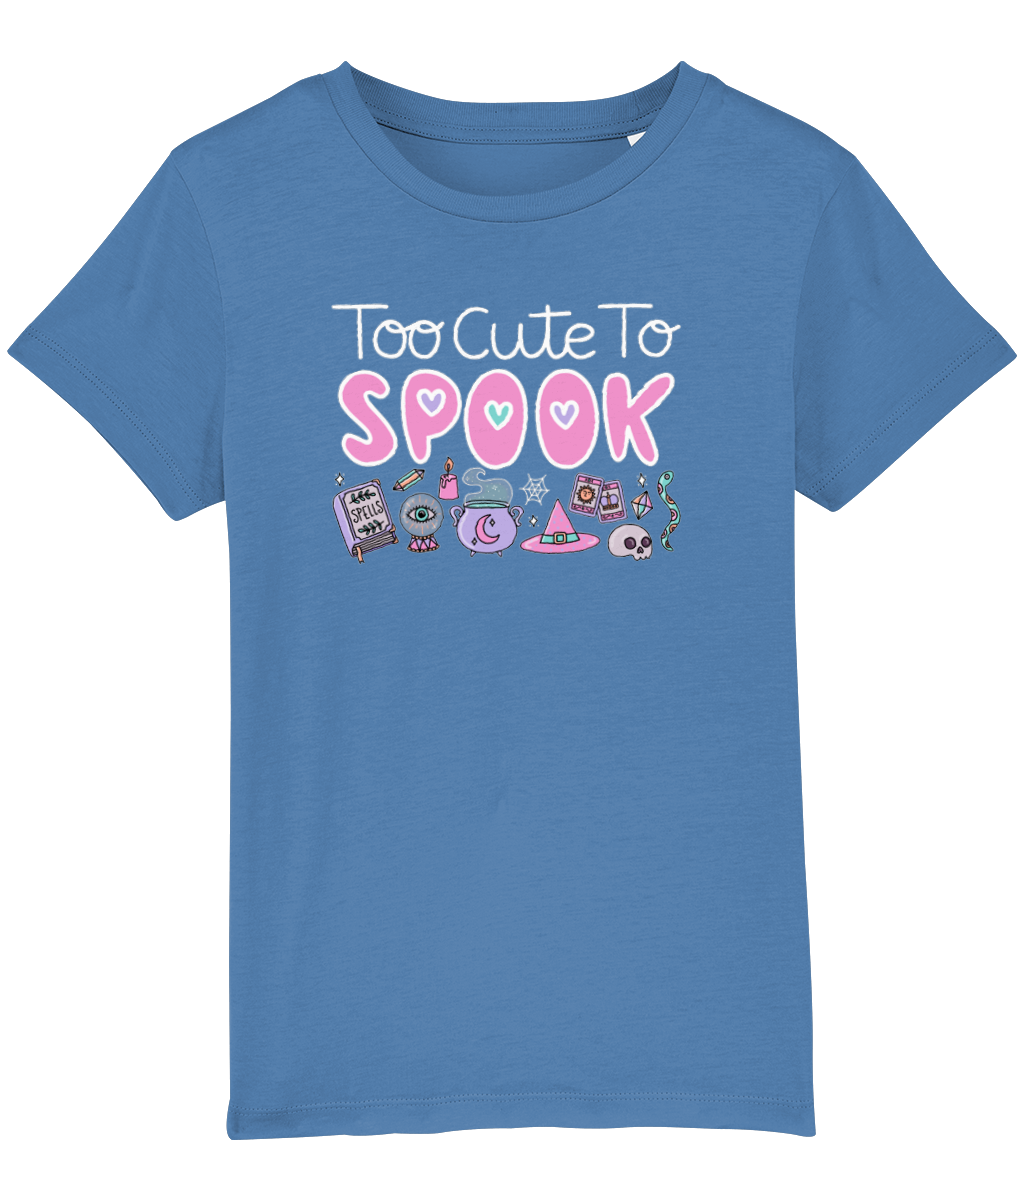 Spellbound Kids T-Shirt - Too Cute To Spook